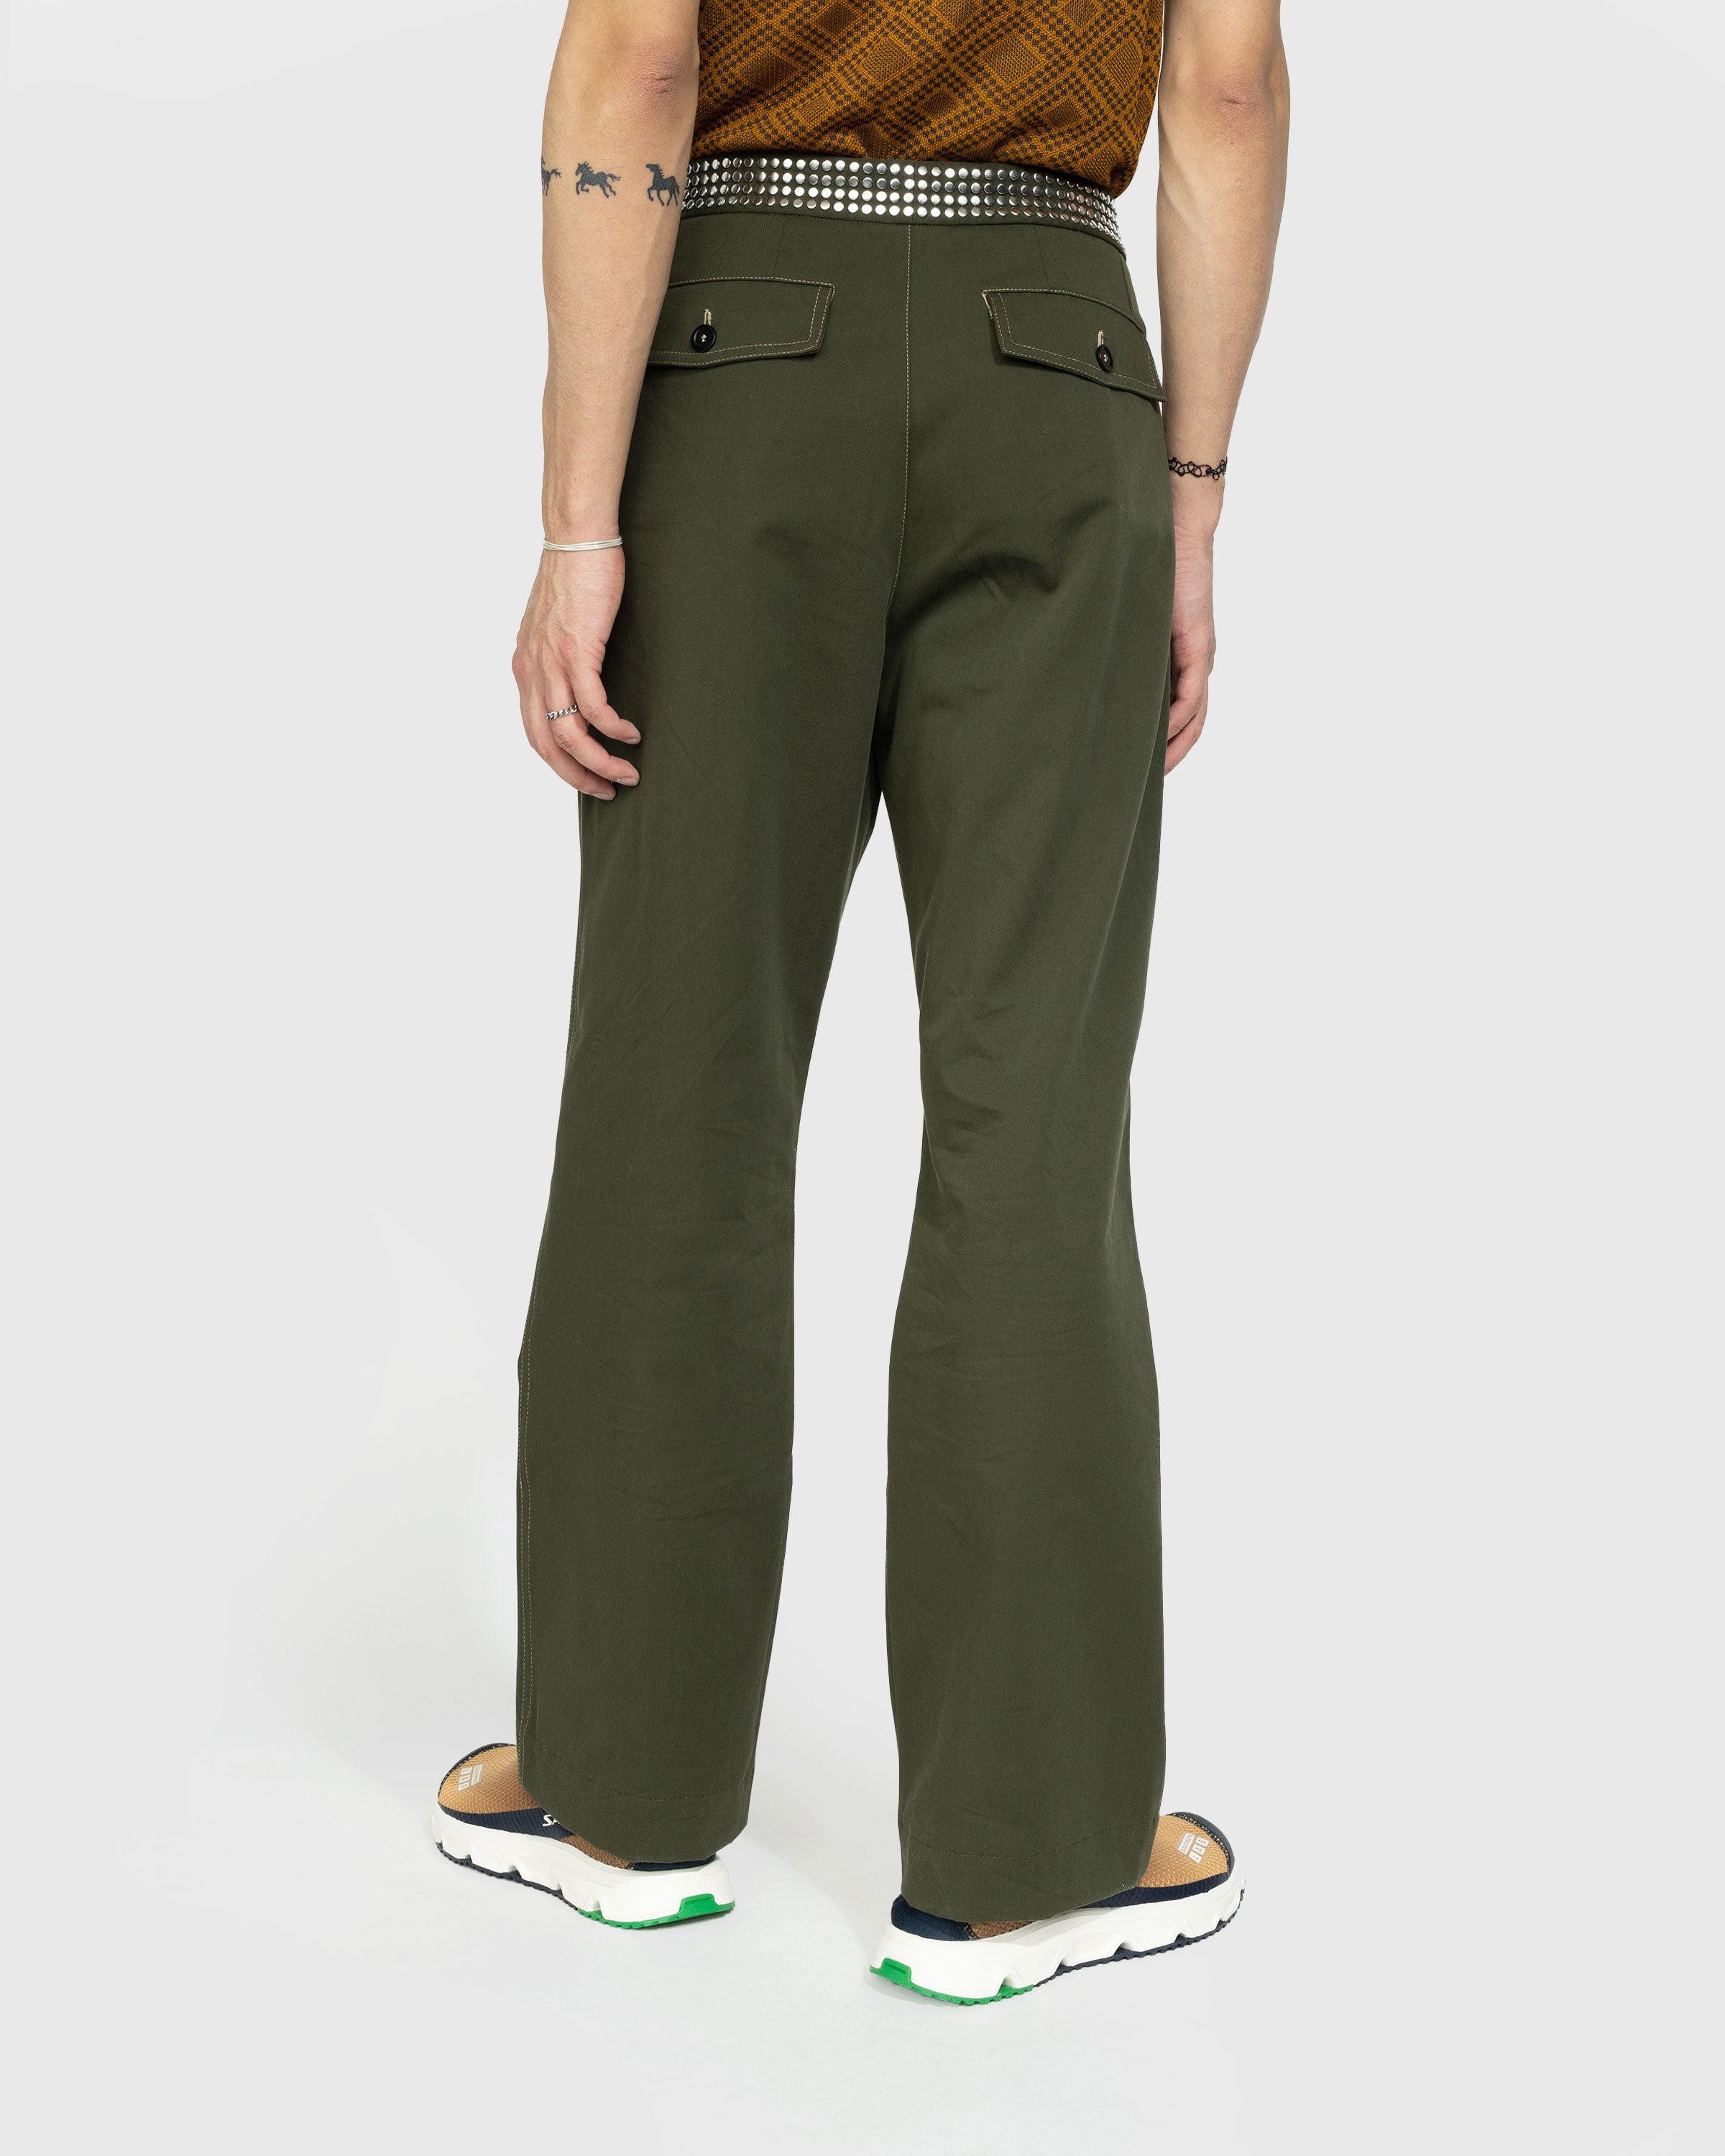 Wales Bonner - Tomorrow Trousers - Clothing - Green - Image 5